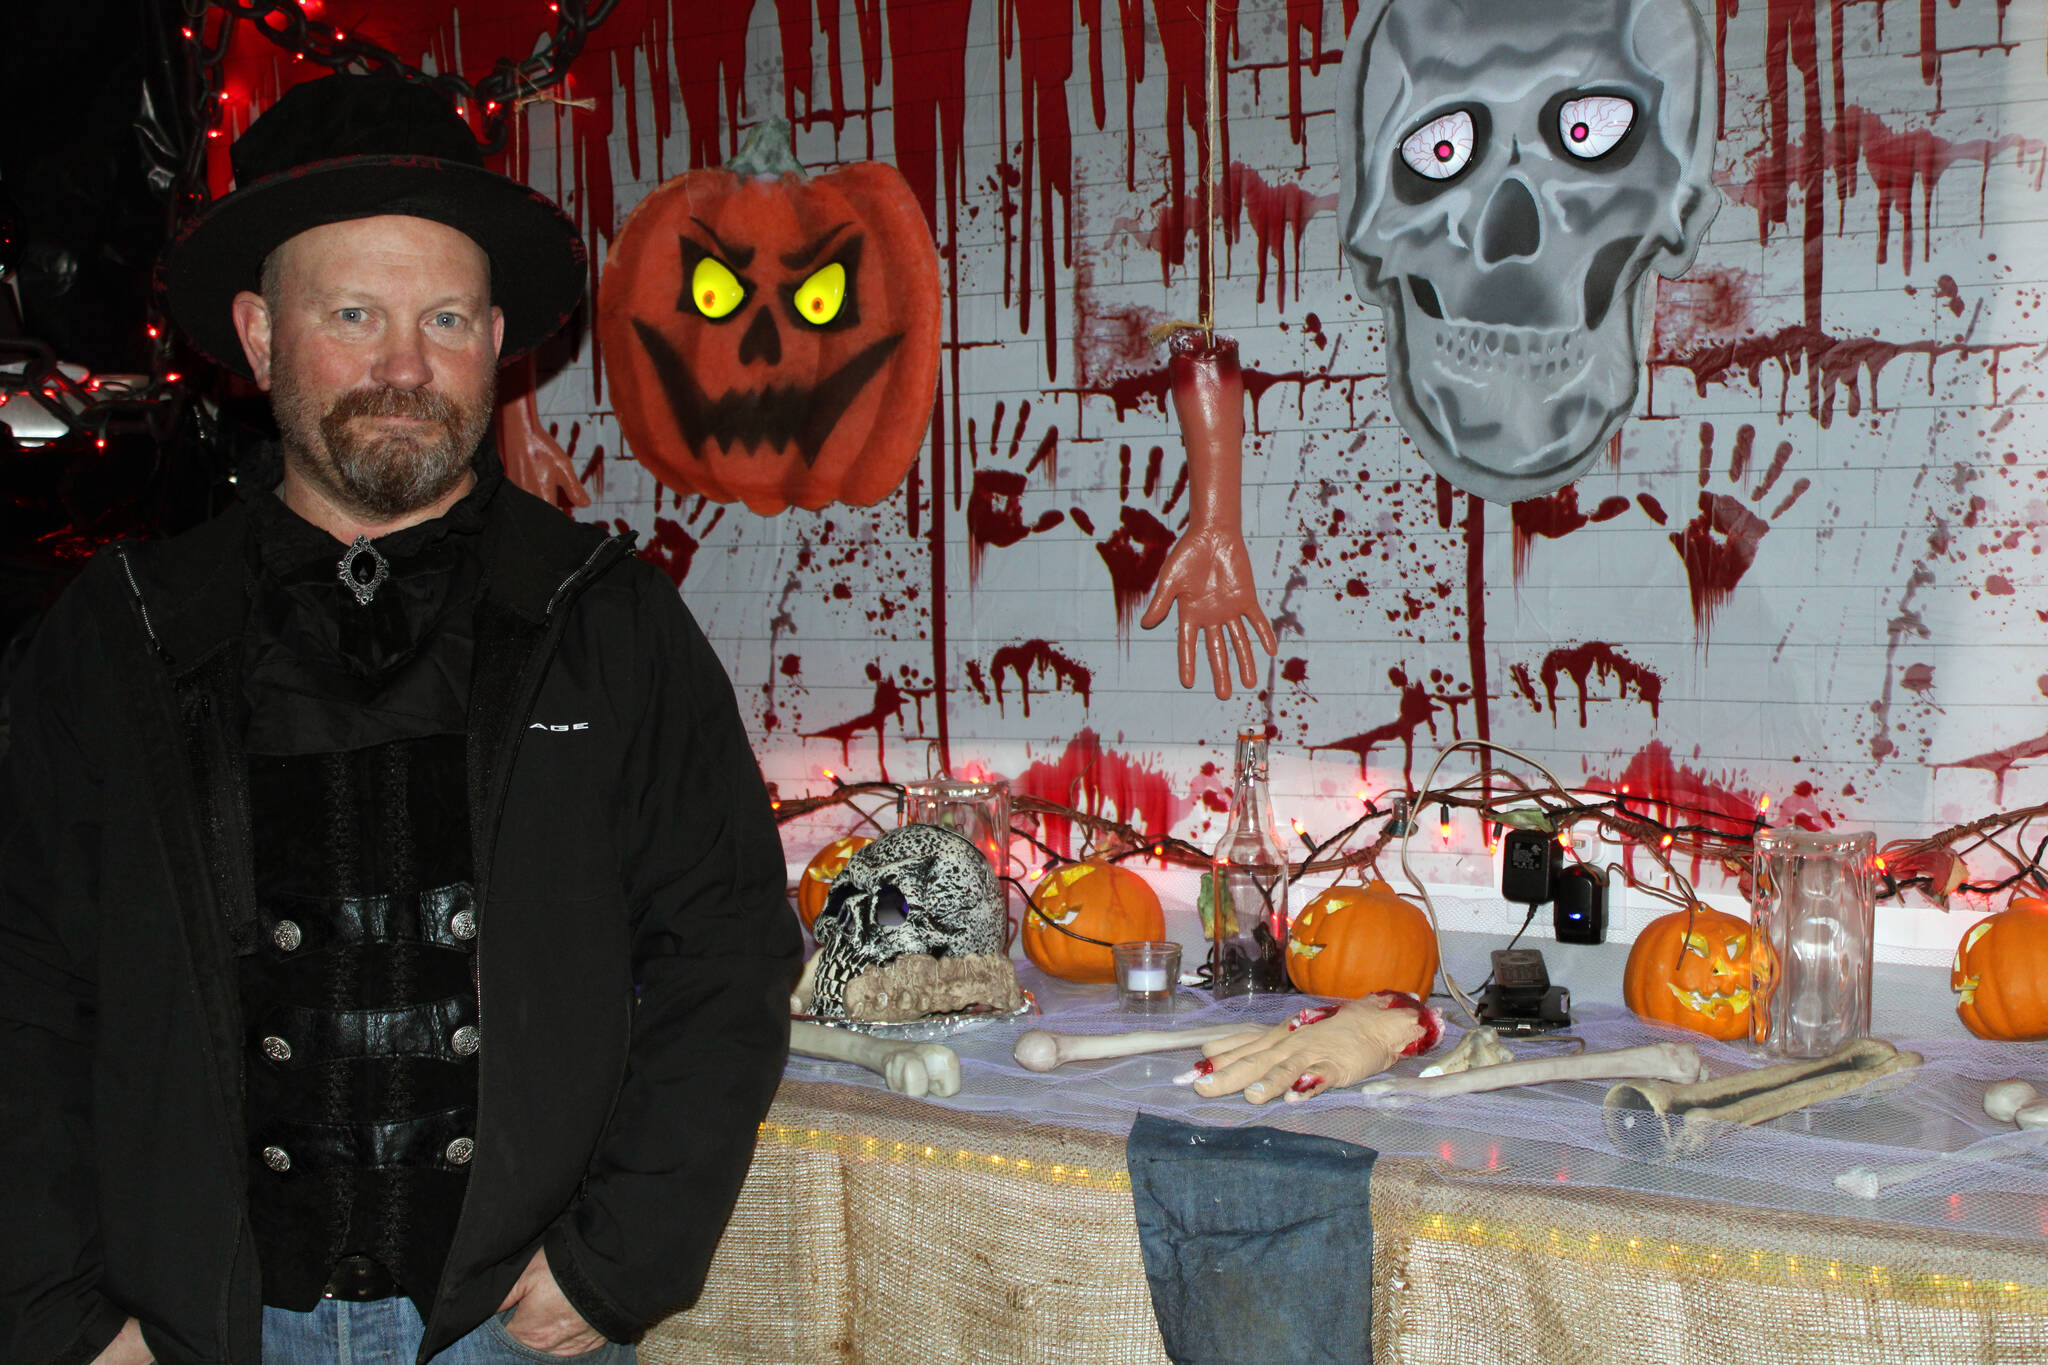 Dan Earls shows off some of the scenes on display at Earls Haunted Garage. On Oct. 28, he was adding finishing touches to his display in anticipation of thrill-seekers who will stop by for a scare over Halloween weekend. (Dana Zigmund/Juneau Empire)